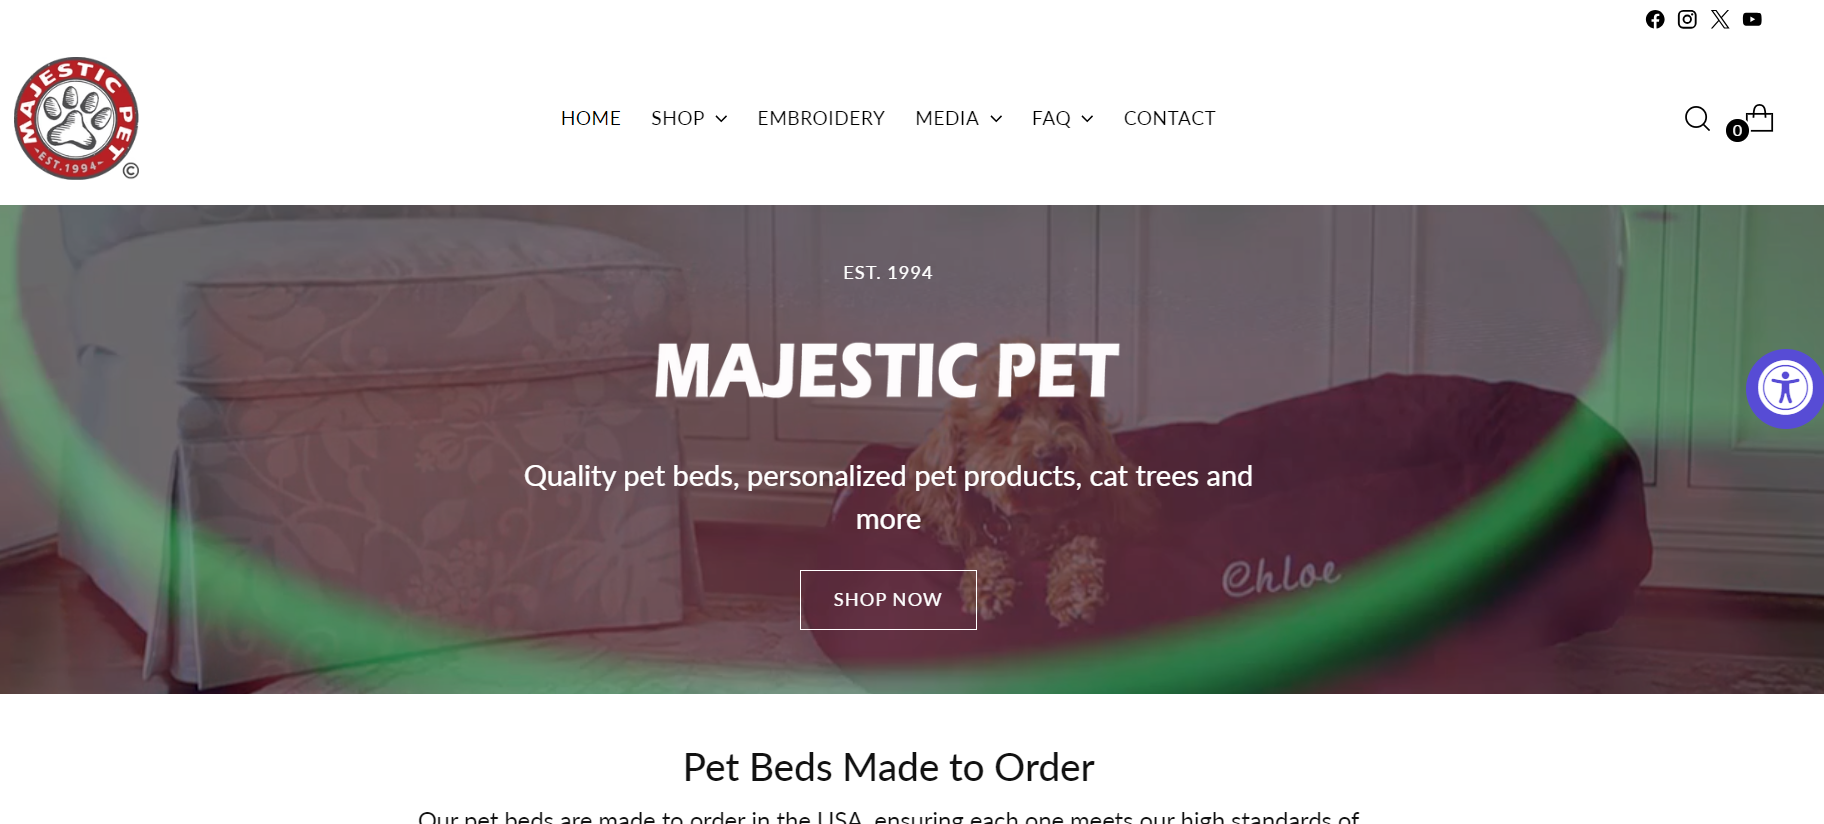 Majestic Pet, located in the United States, is a supplier of pet products and a trusted private label dropshipping supplier. 